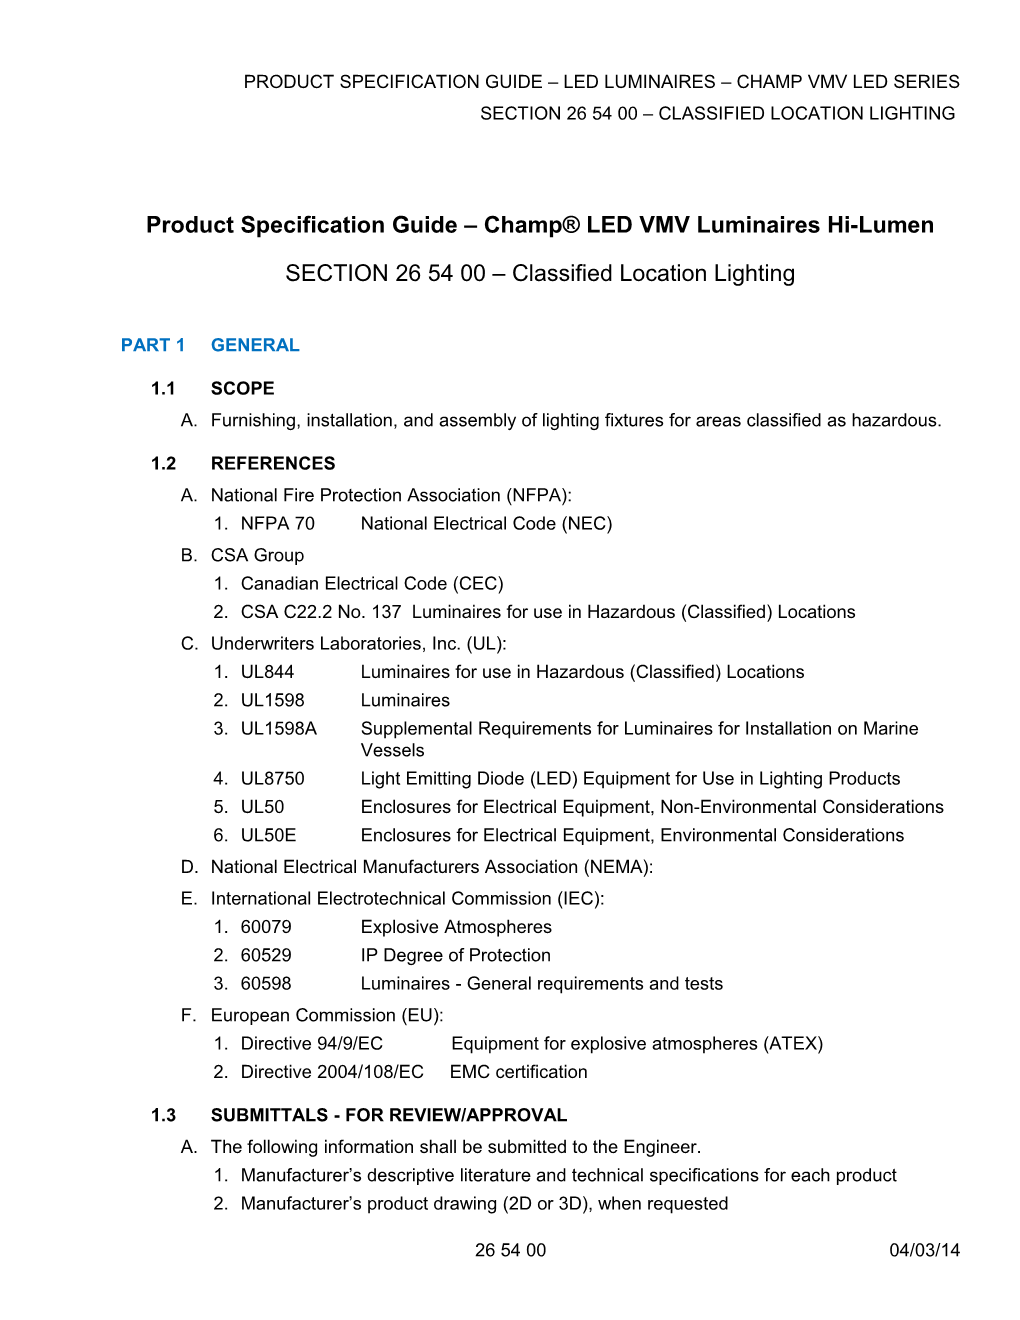 PRODUCT SPECIFICATION GUIDE LED Luminaires Champ VMV LED Series